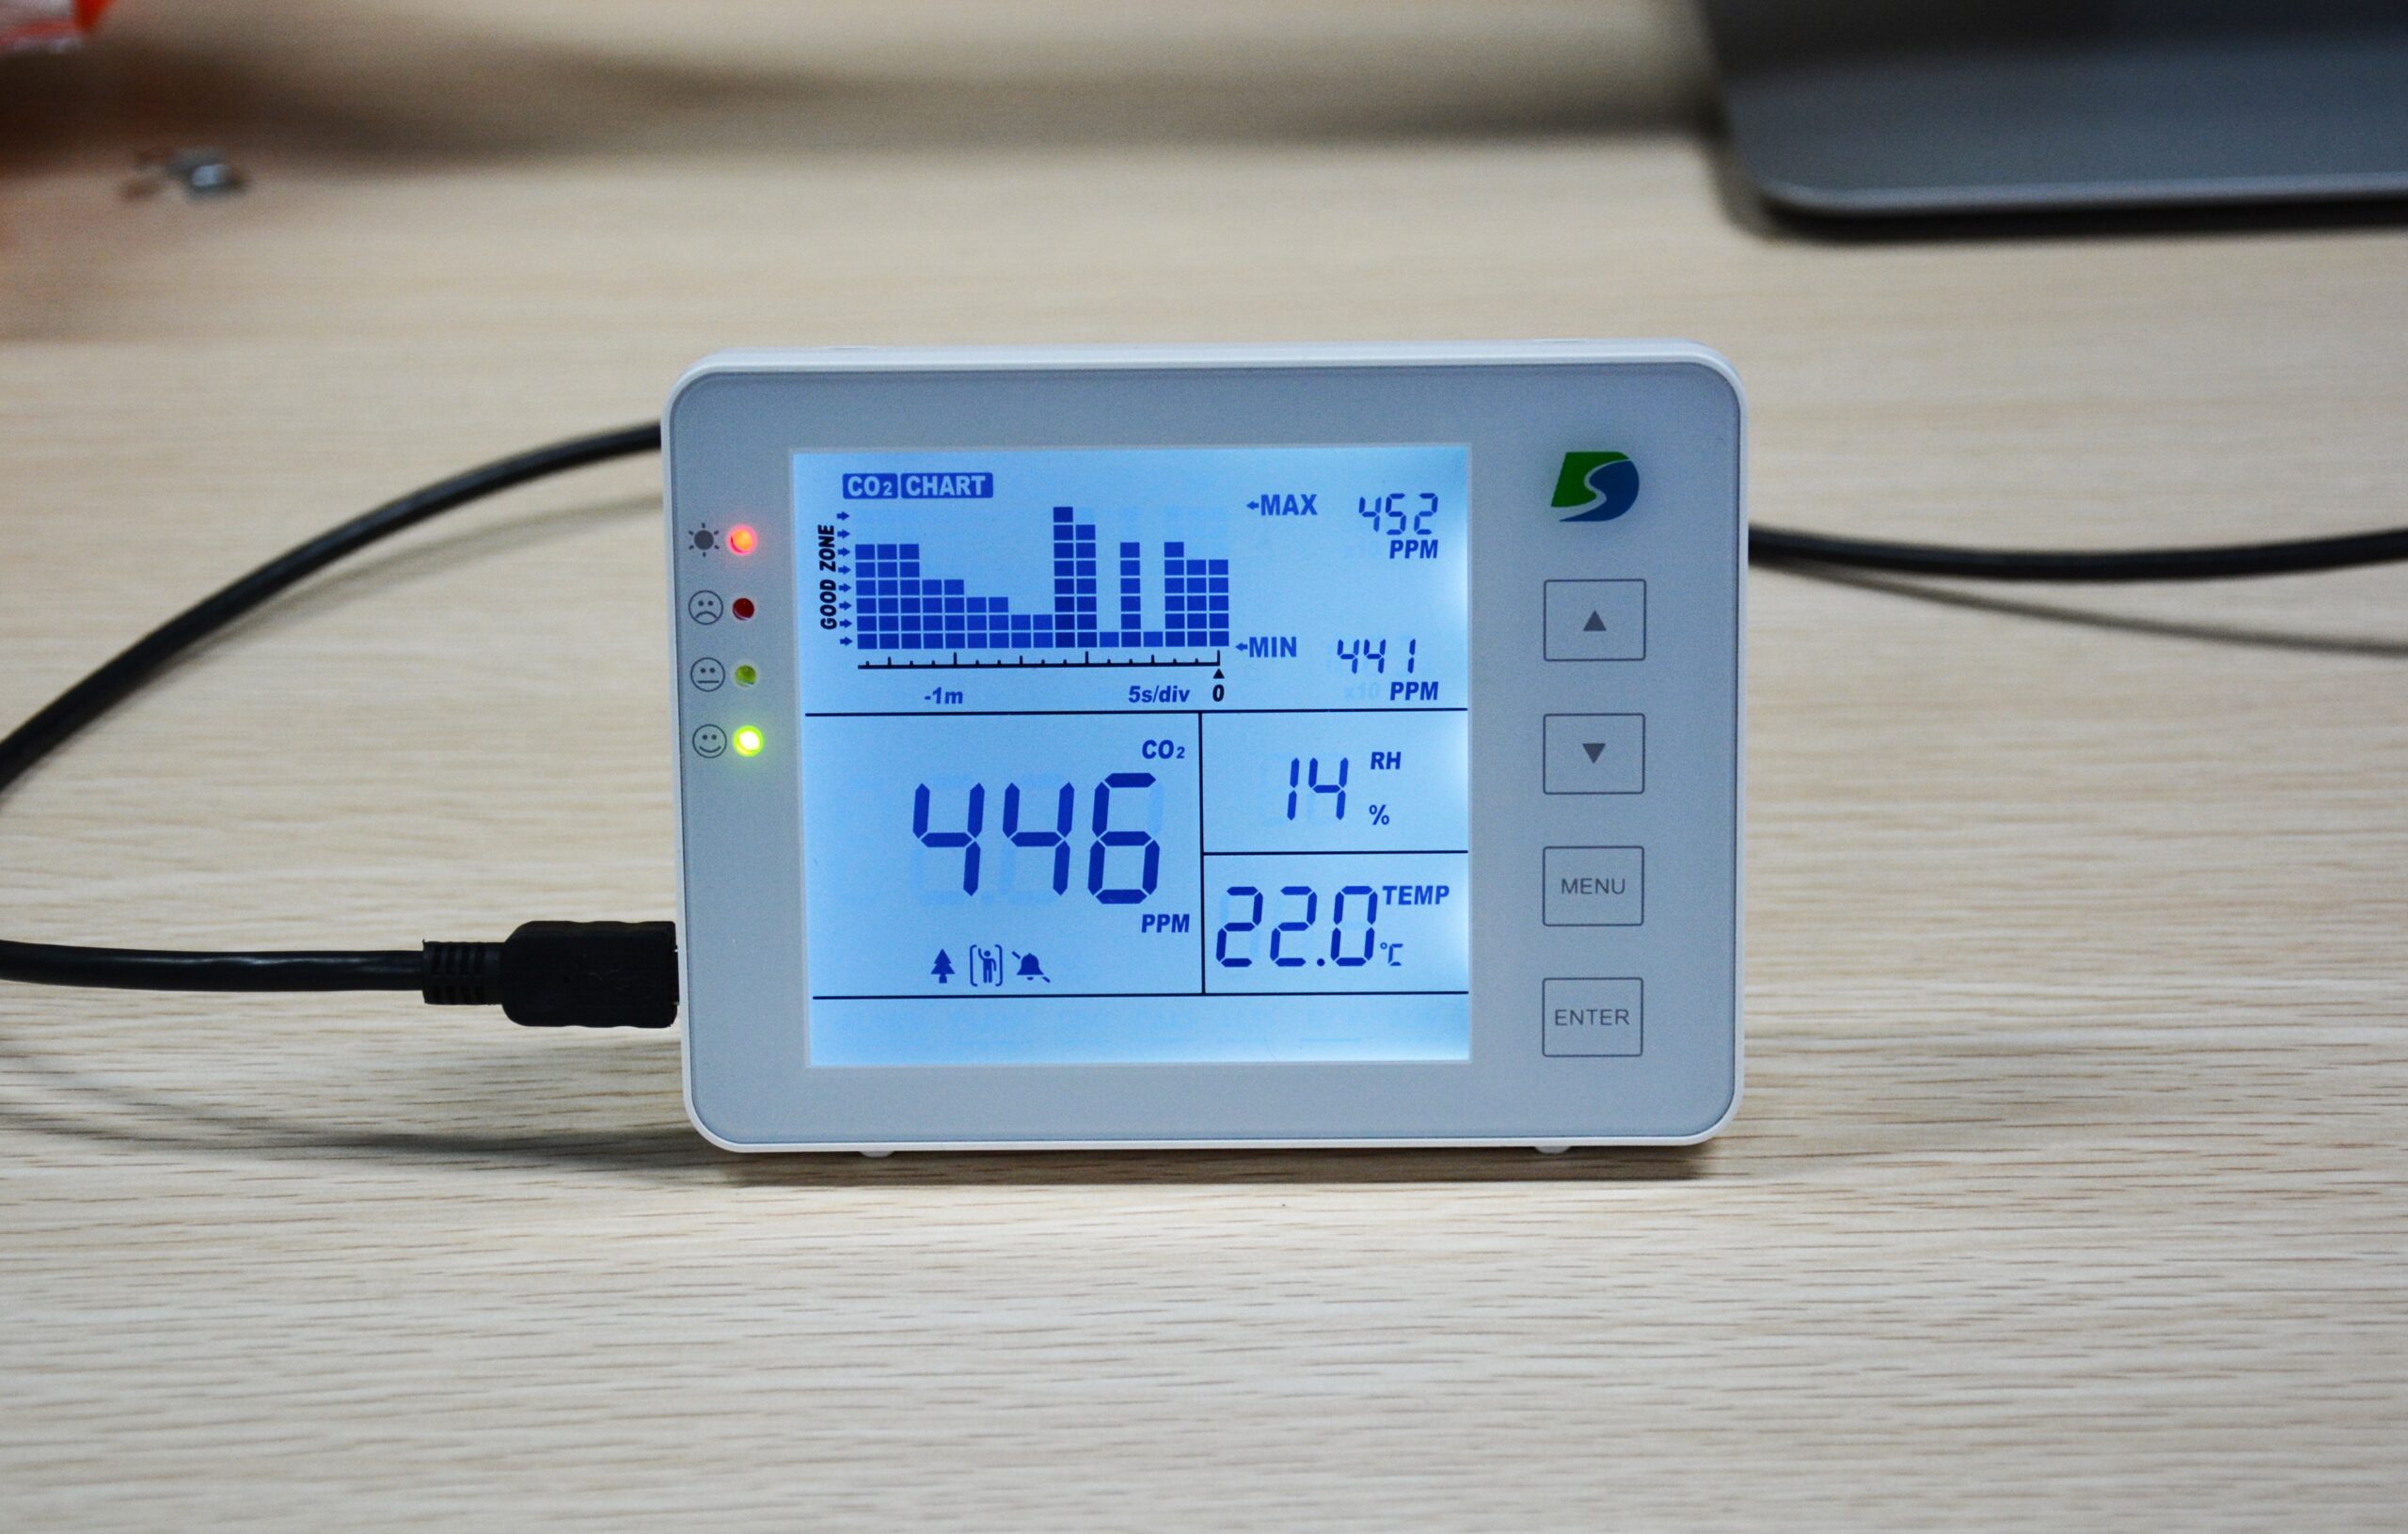 Carbon dioxide monitor showing a reading of 446 ppm